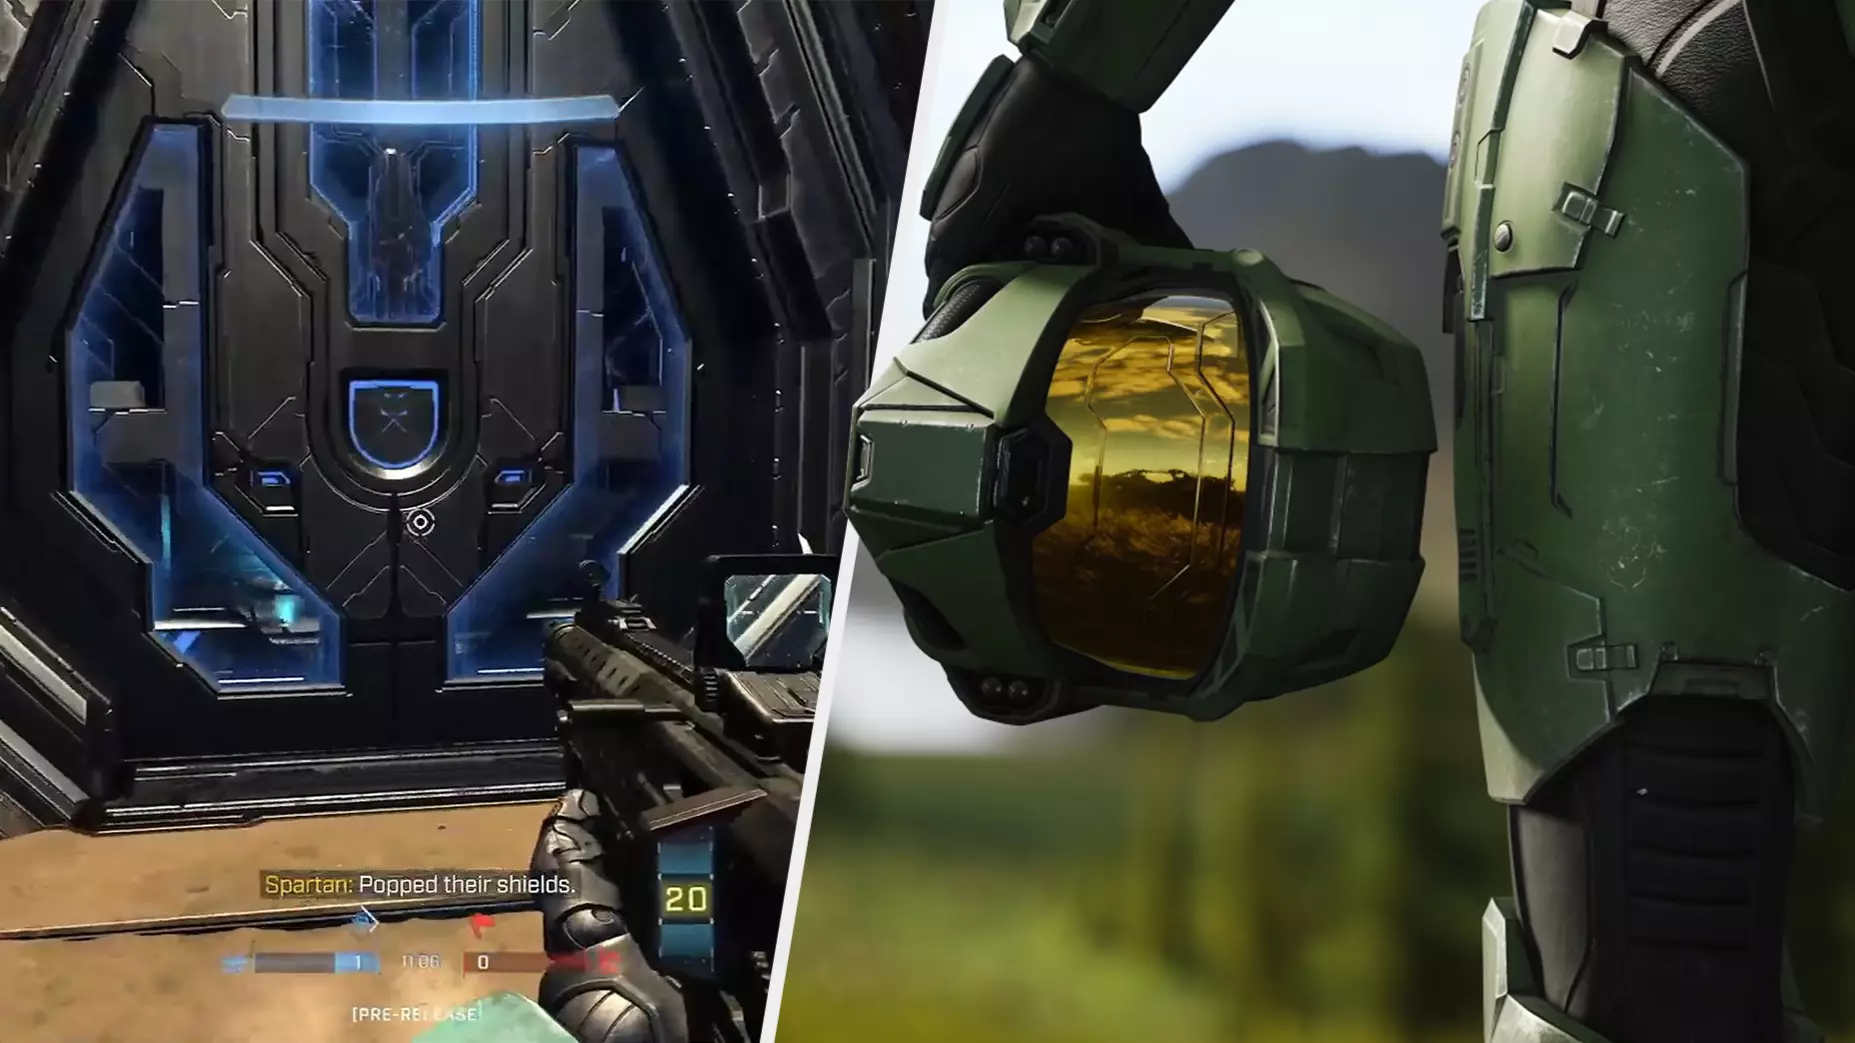 'Halo Infinite' Players Are Super Happy To See Doors Are Back In The Game